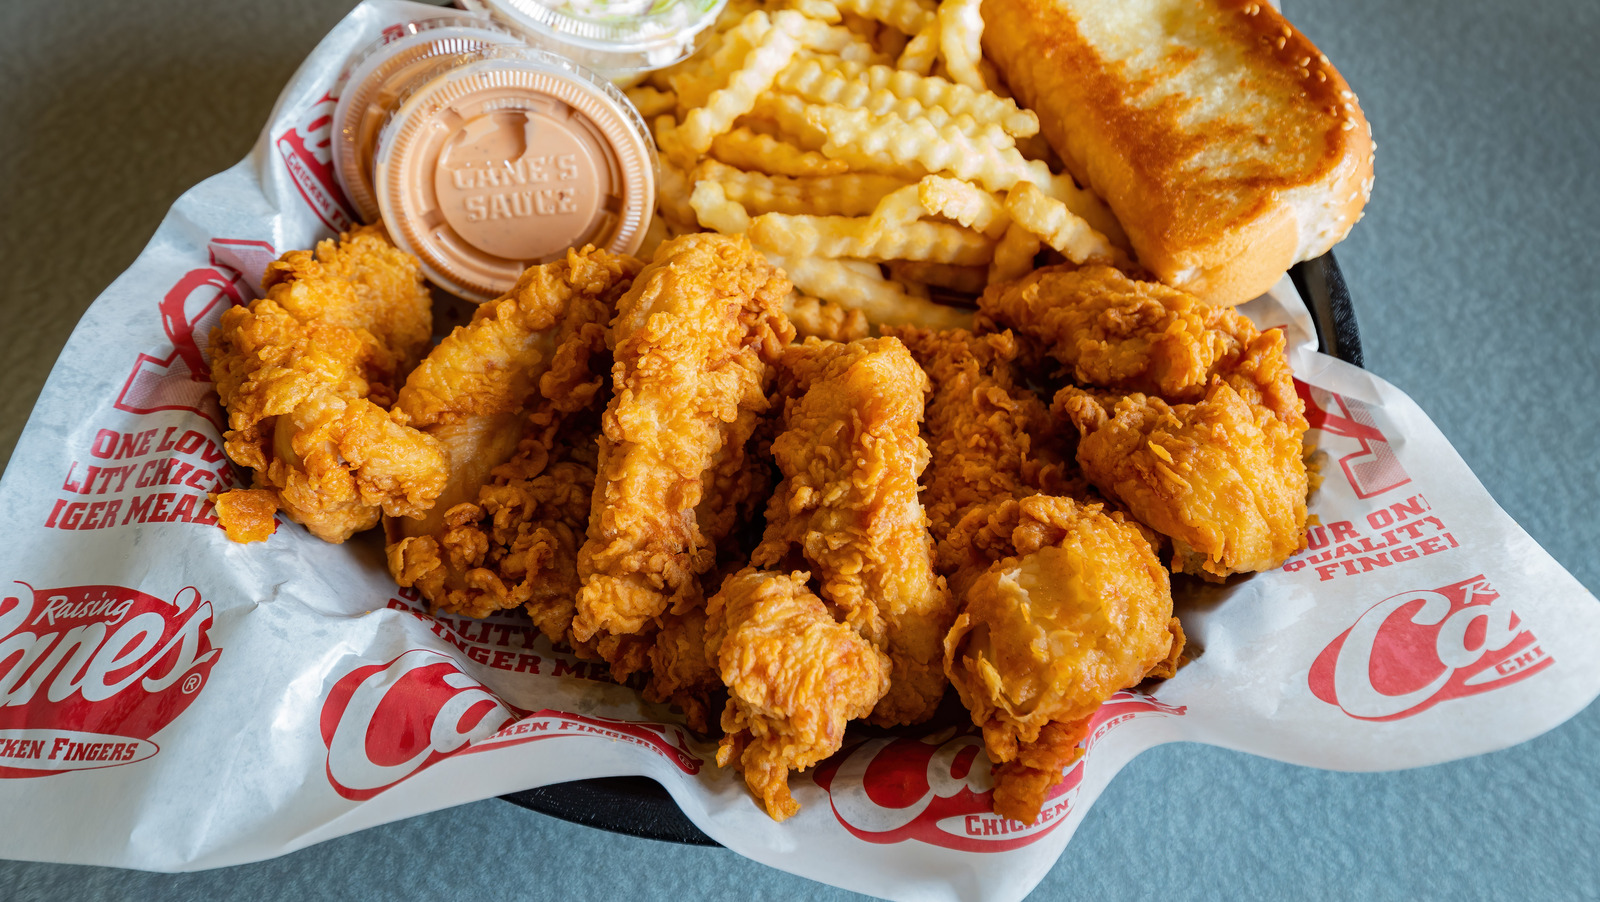 This Is What Makes Raising Cane's Chicken So Delicious Exclusive